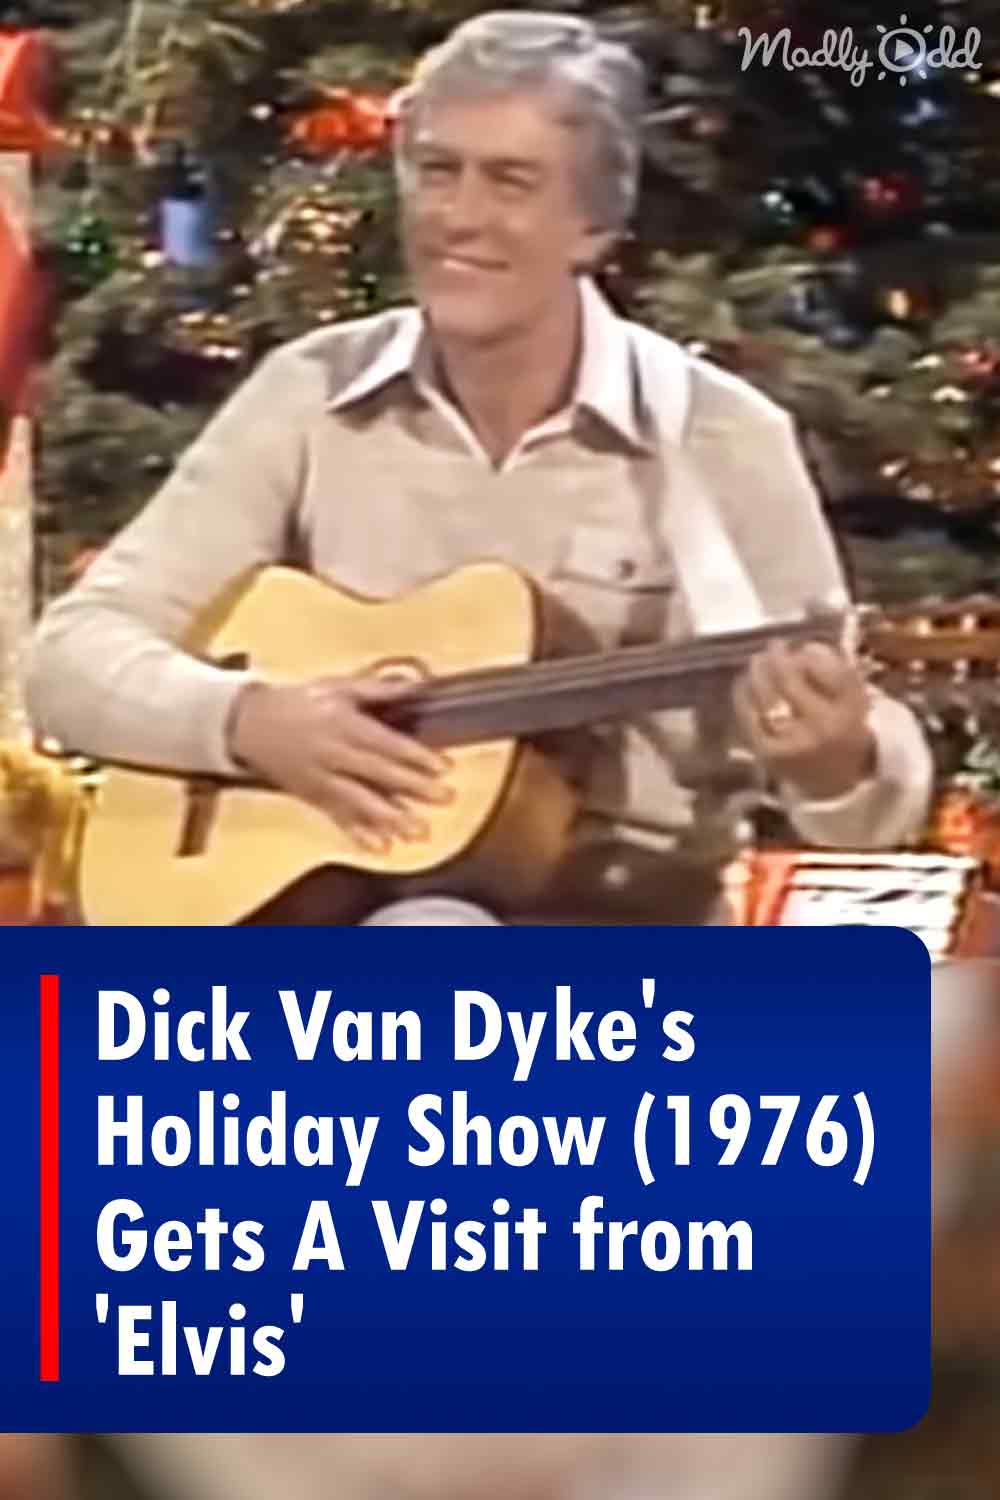 Dick Van Dyke\'s Holiday Show (1976) Gets A Visit from \'Elvis\'